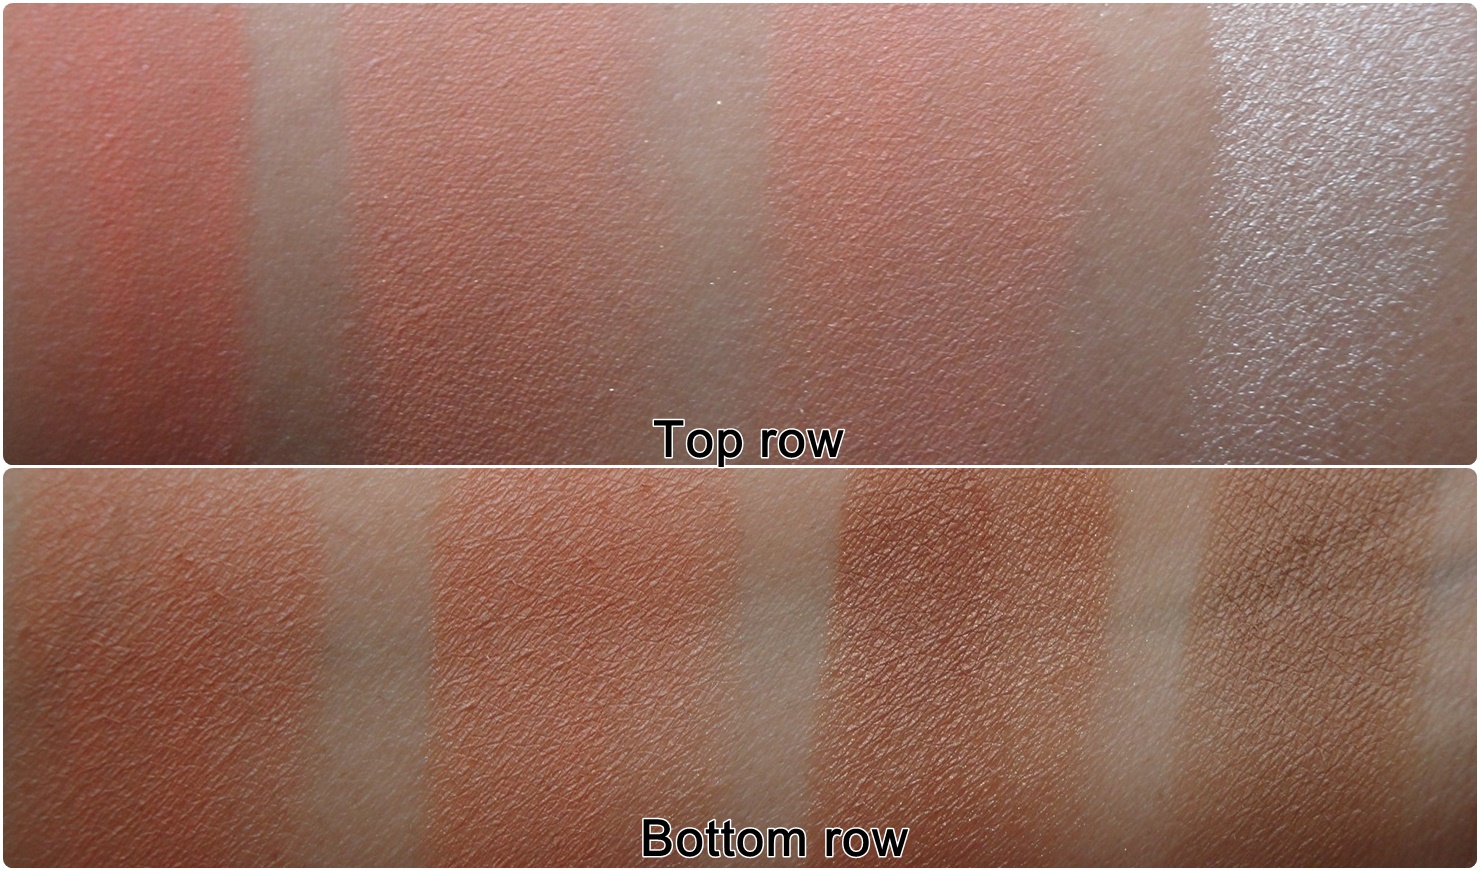  Sivanna Colors Ultra Blush Palette 01 swatches